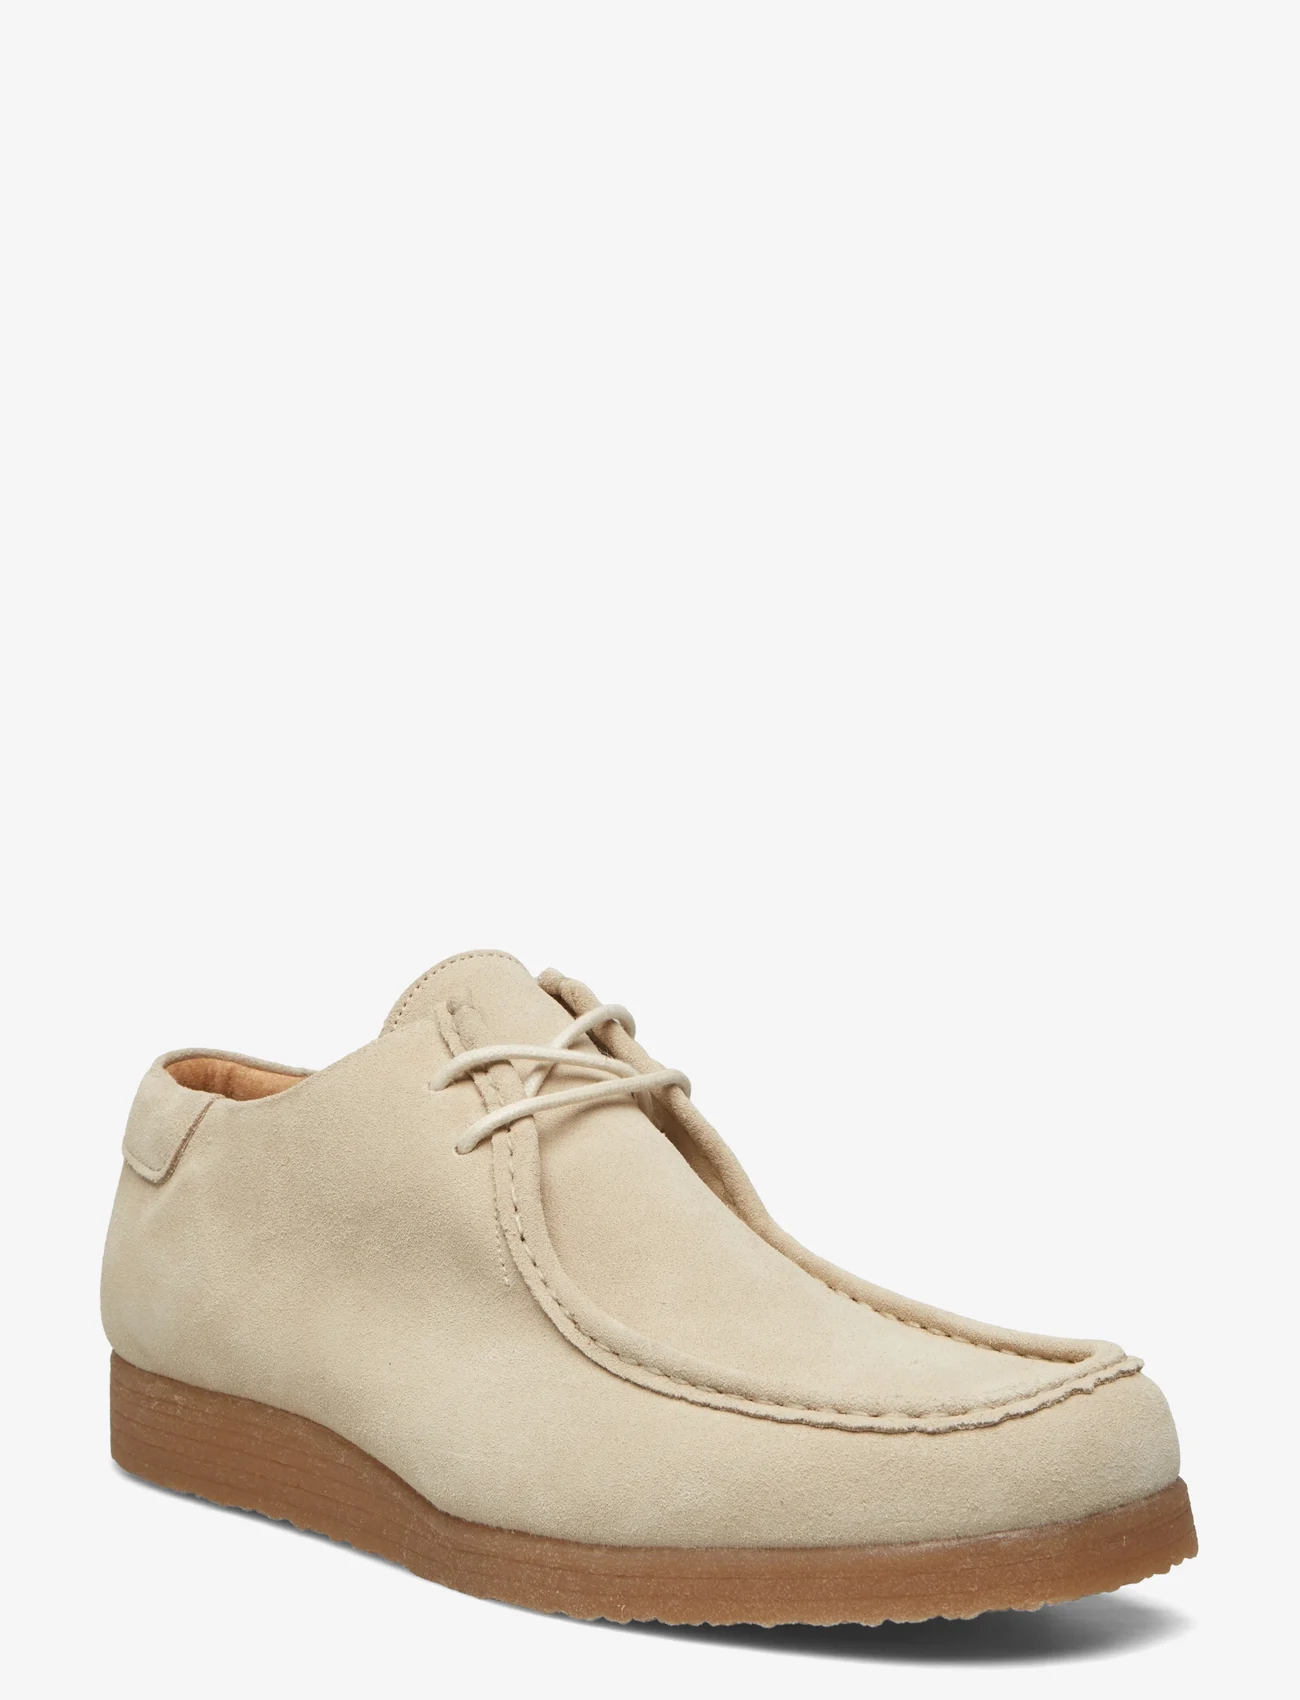 Selected Homme - SLHCHRISTOPHER NEW SUEDE MOC-TOE SHOE B - boots - oatmeal - 0